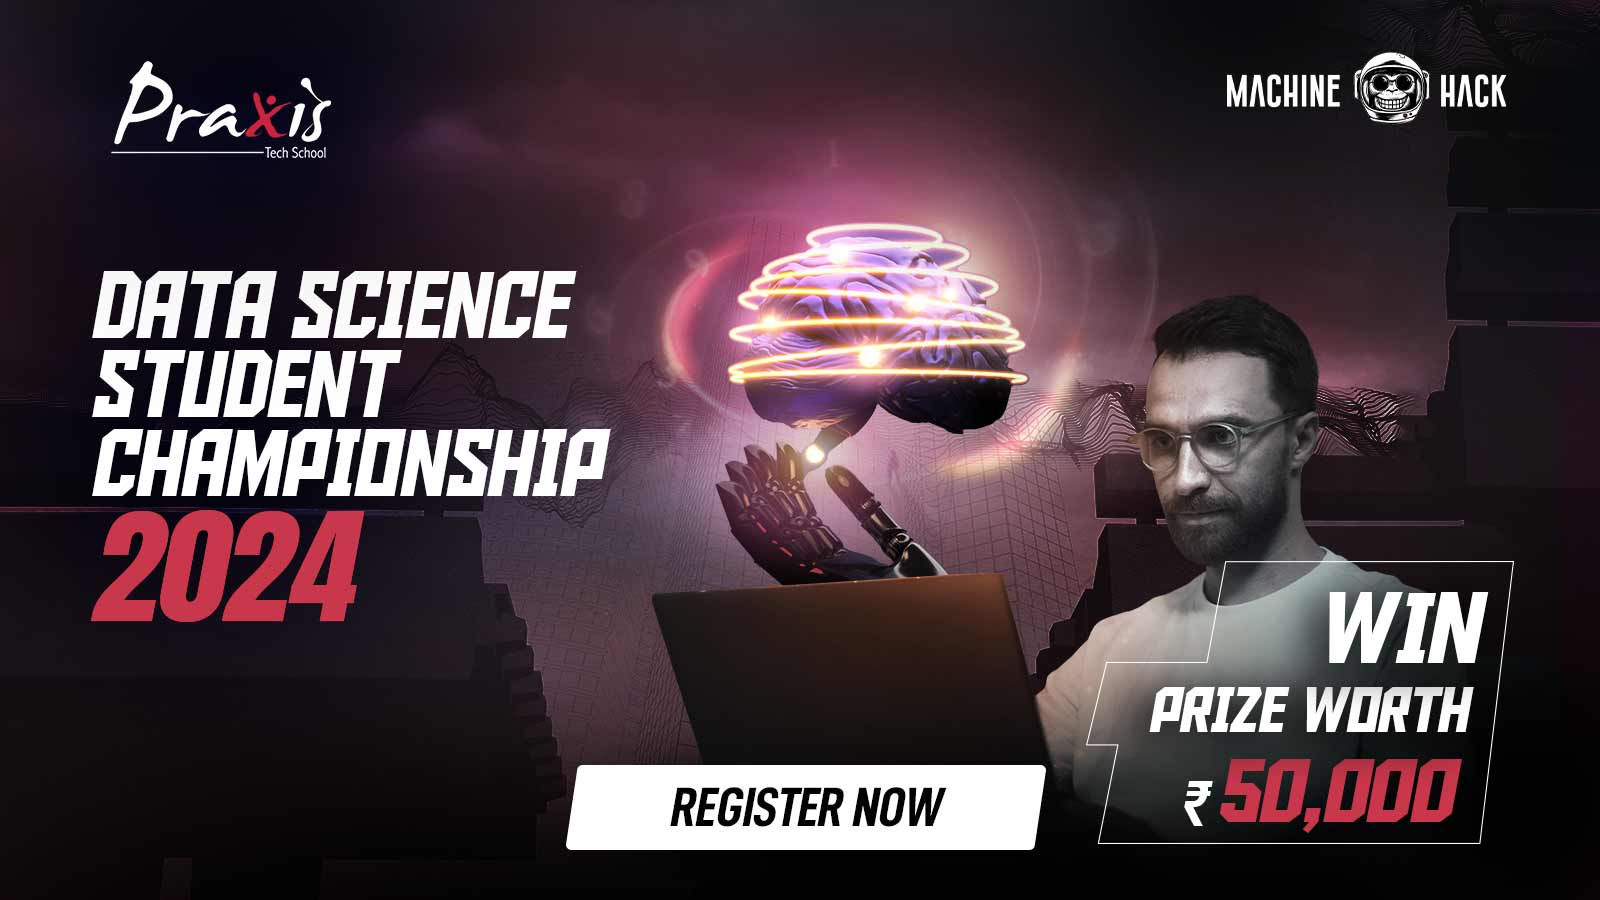 Praxis Tech School & MachineHack to Kickoff the 'Data Science Student Championship 2024'